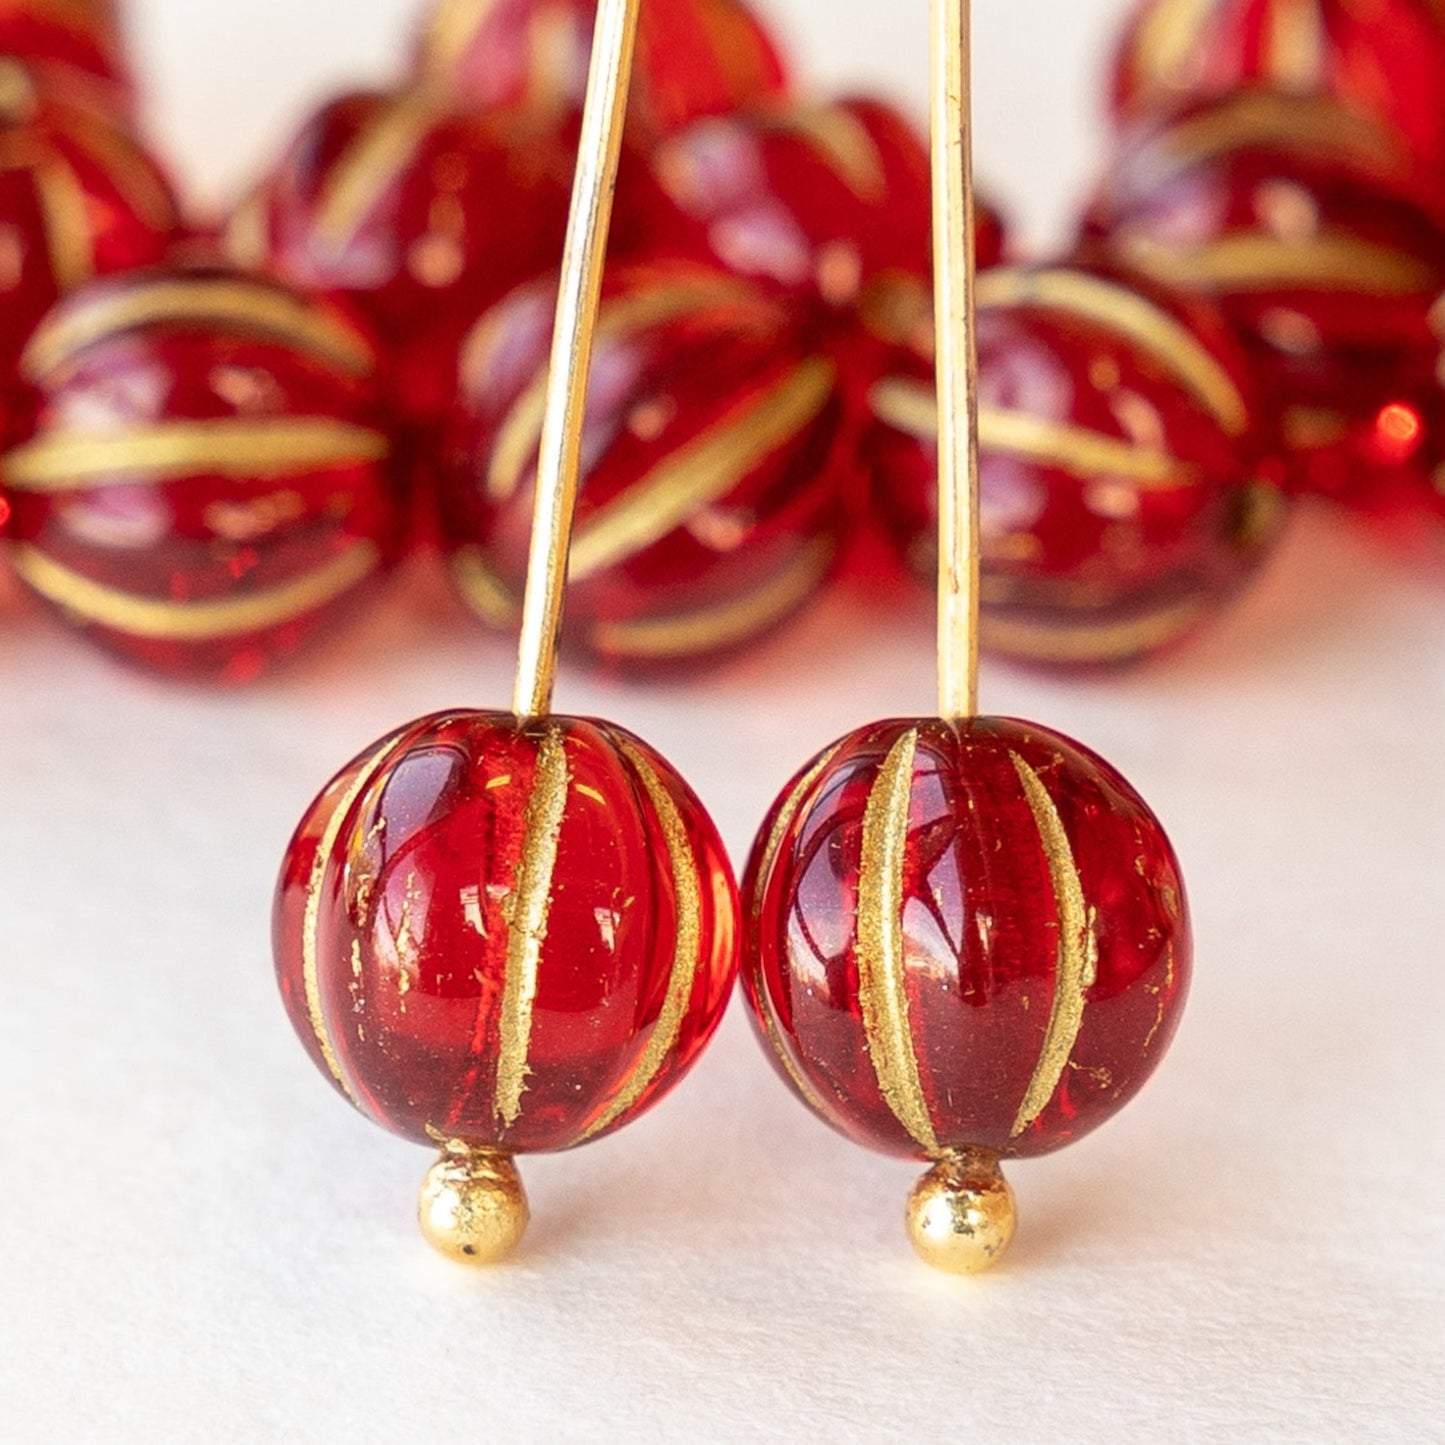 10mm Melon Beads - Ruby Red with Gold Wash - 15 Beads